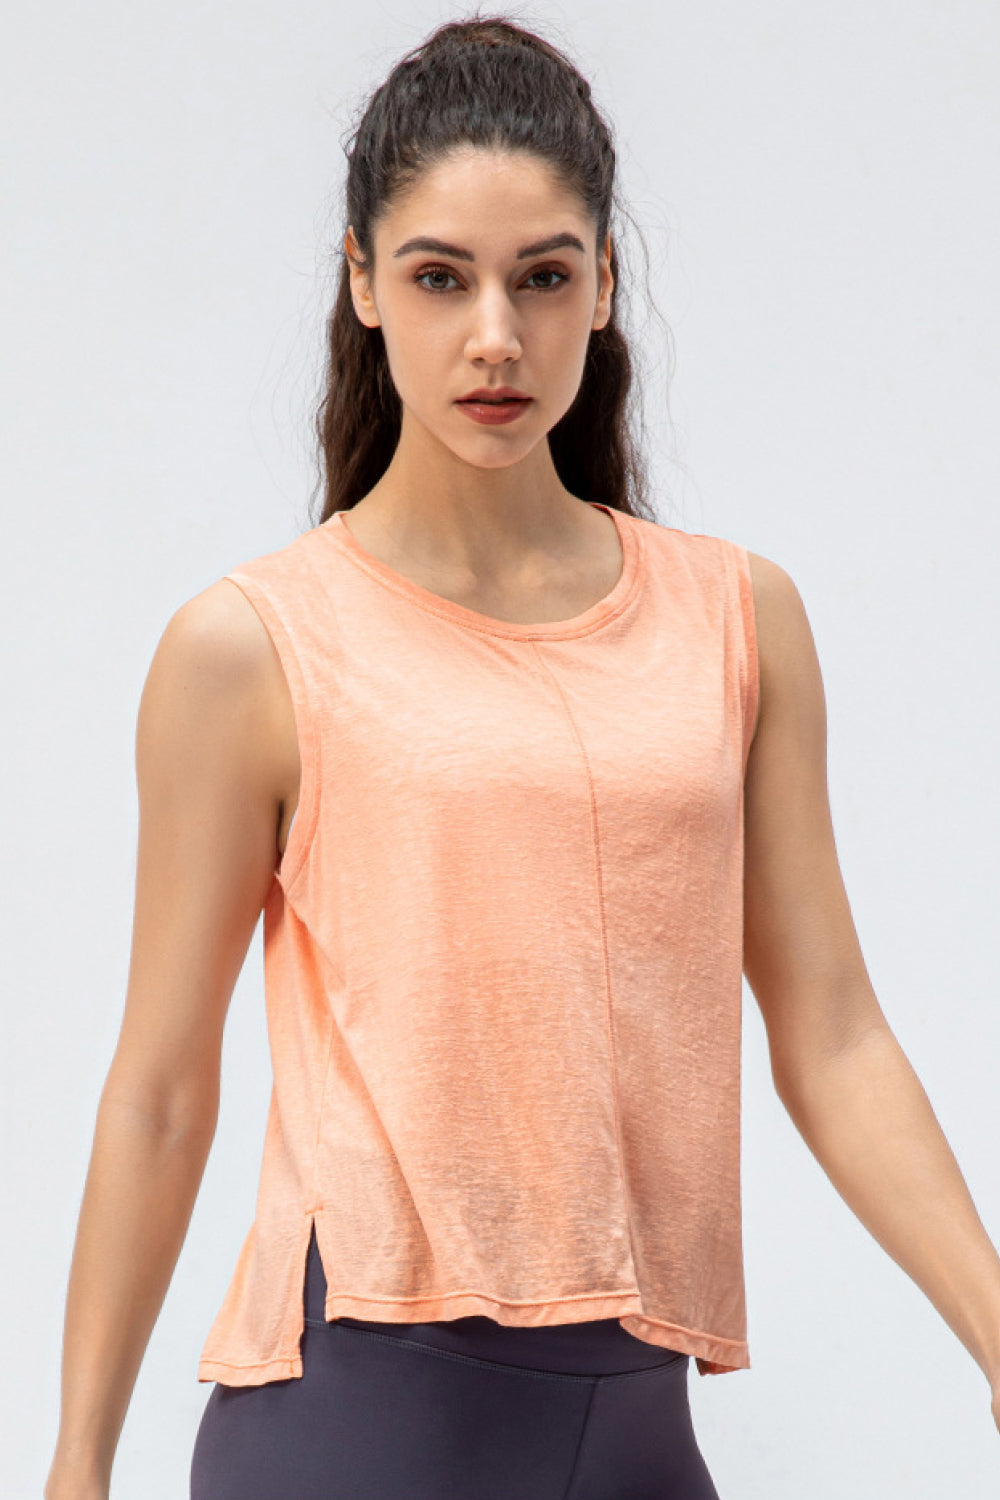 Side Slit High-Low Sleeveless Athletic Top - 99fab 